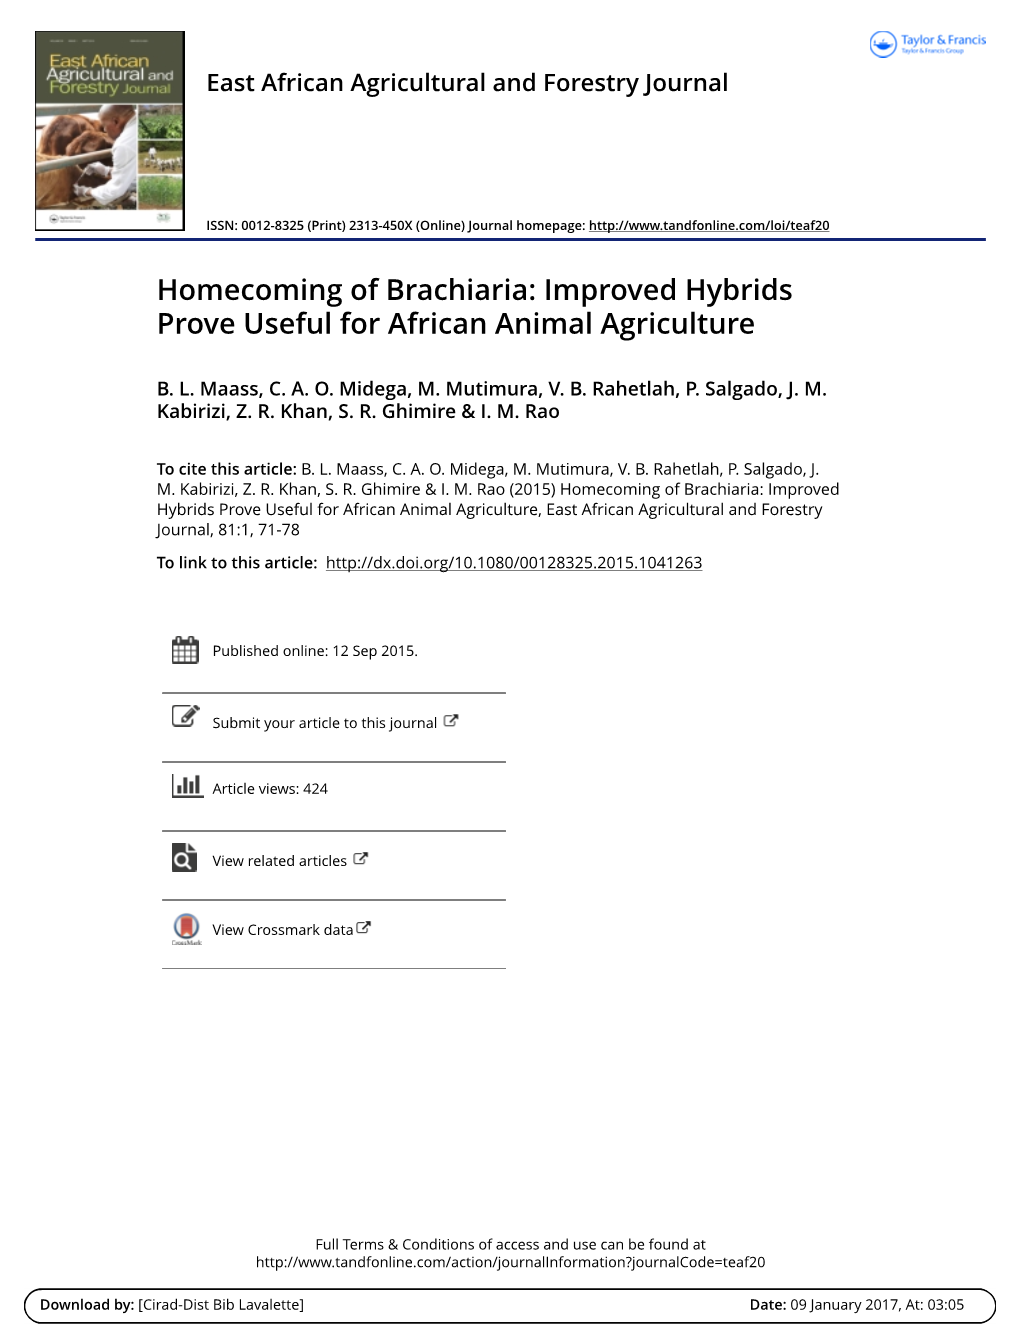 Homecoming of Brachiaria: Improved Hybrids Prove Useful for African Animal Agriculture